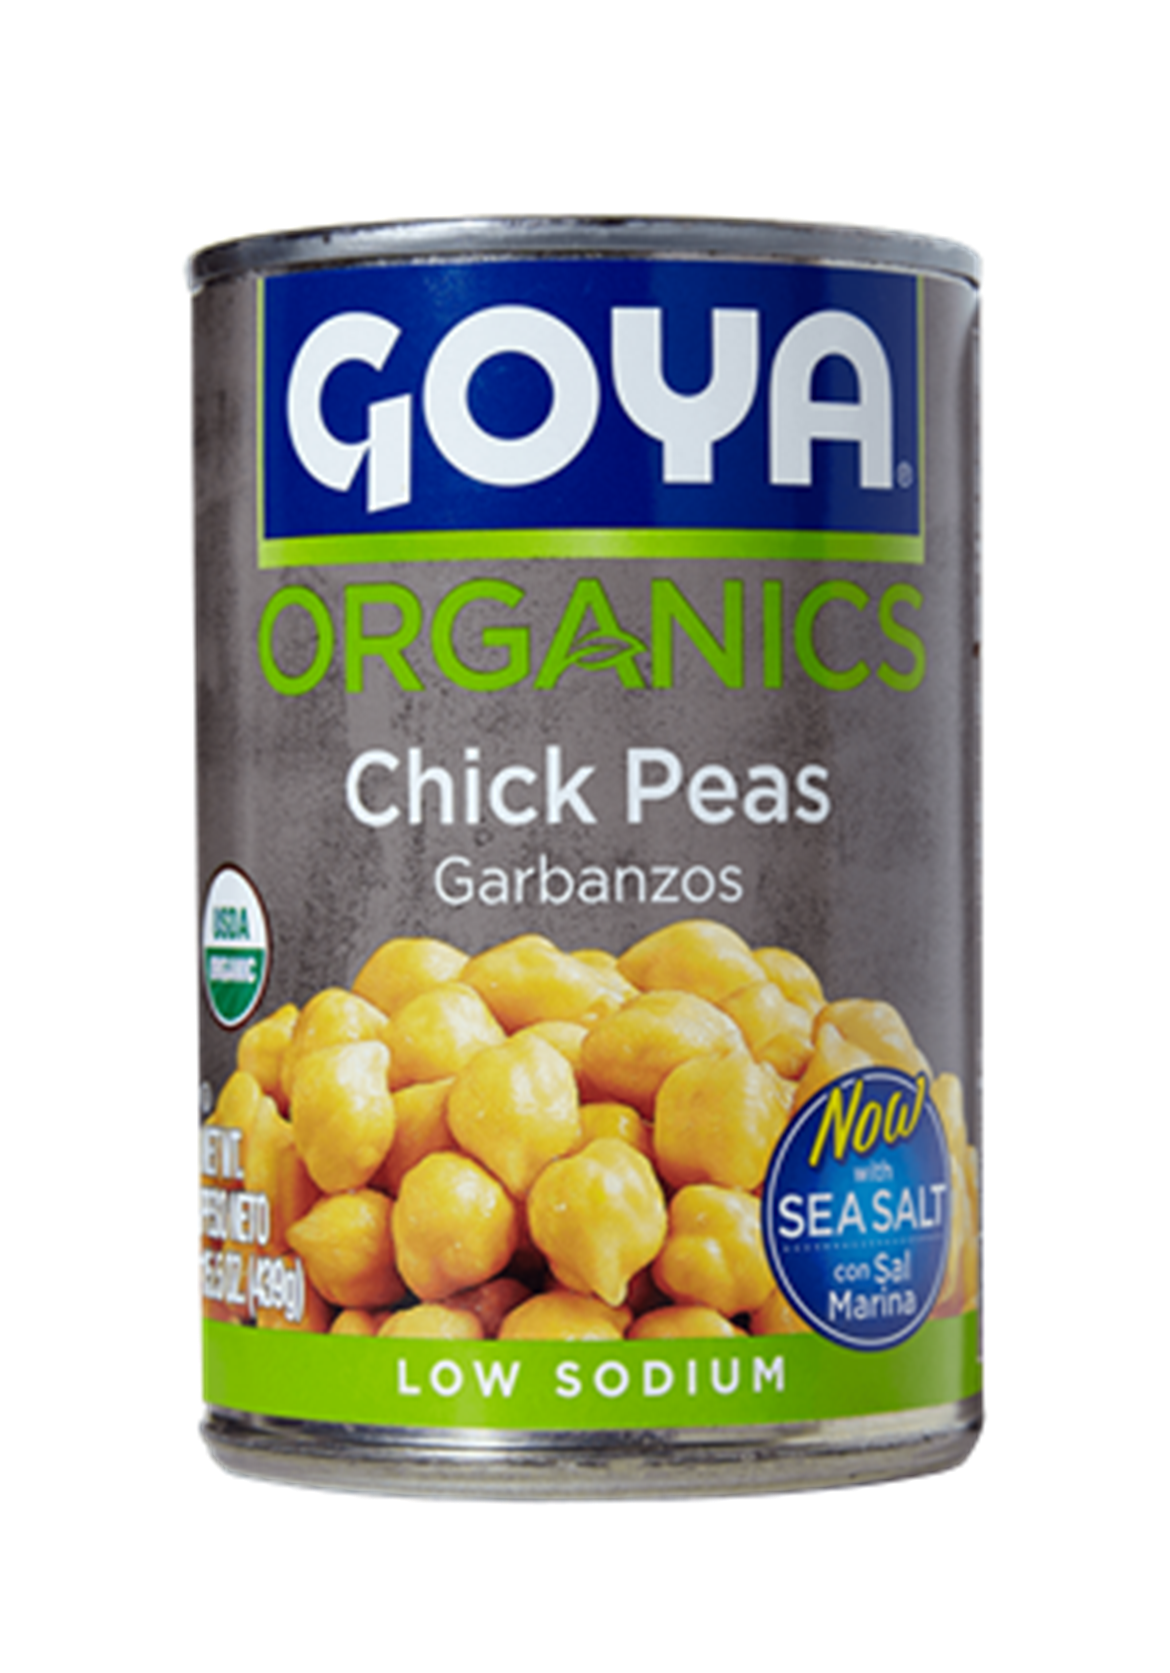 Press Release: GOYA FOODS LAUNCHES ‘BETTER FOR YOU’ PRODUCT LINE